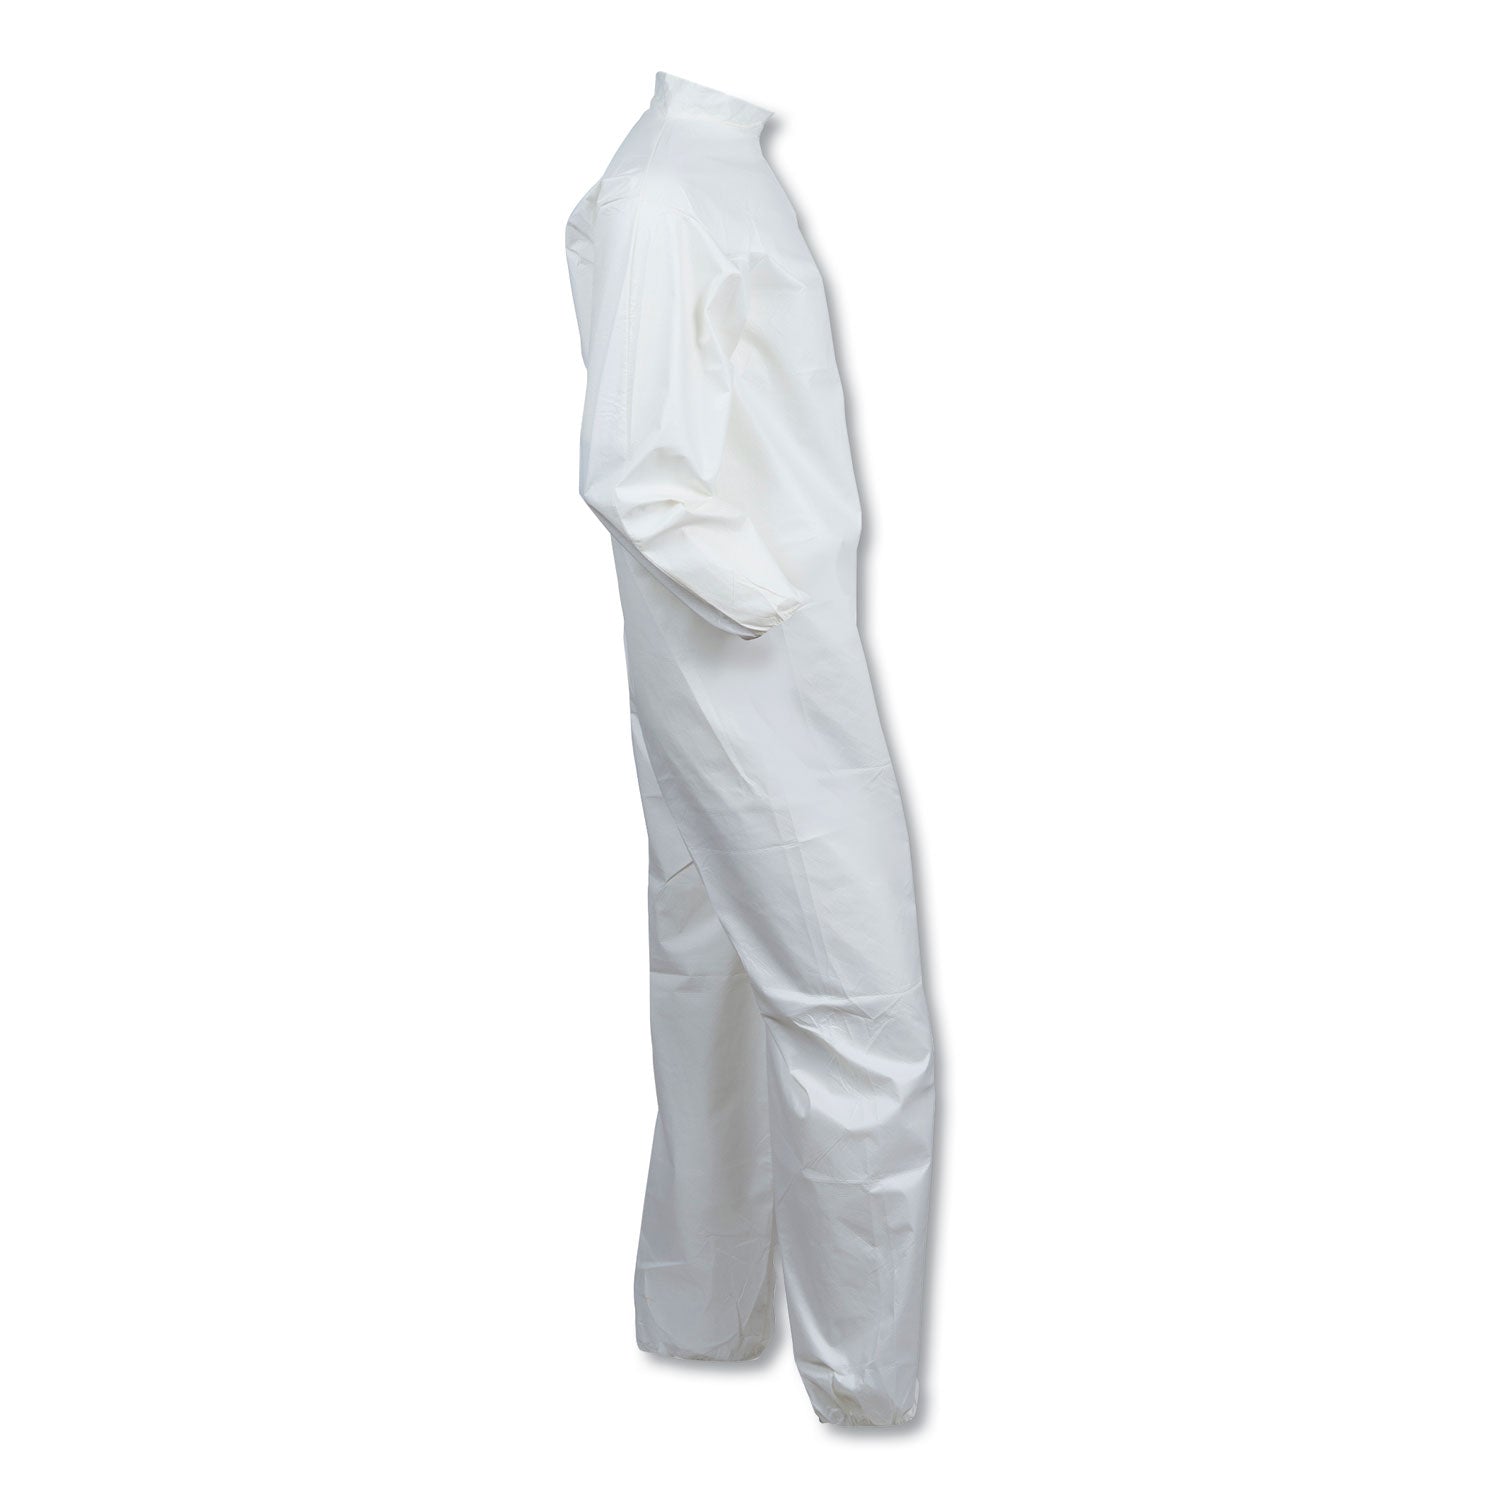 a40-elastic-cuff-and-ankles-coveralls-4x-large-white-25-carton_kcc44317 - 6